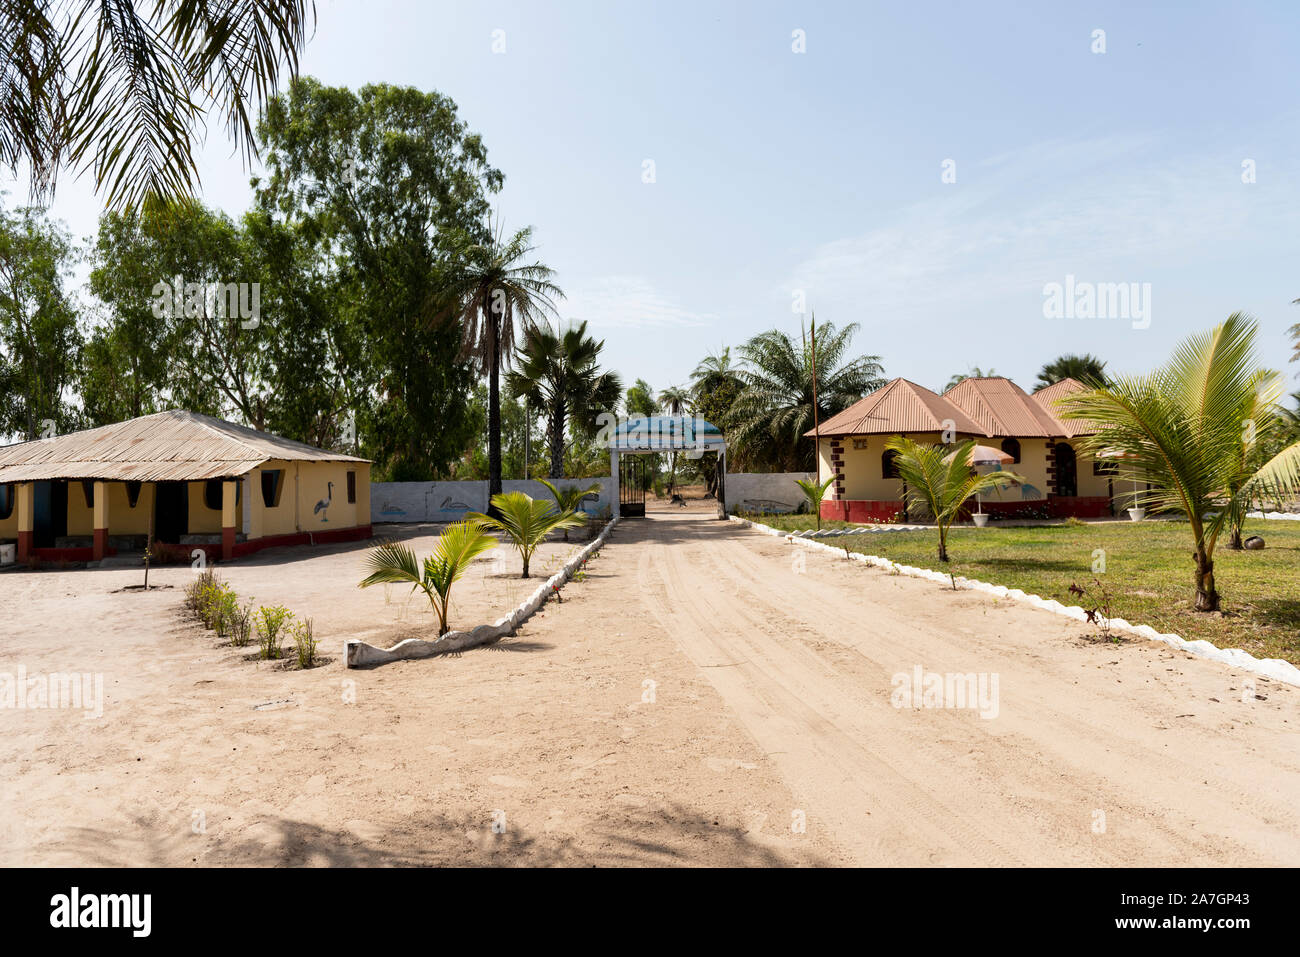 Entrance to Wunderland Lodge, Kubuneh Village, The Gambia, West Africa. Stock Photo